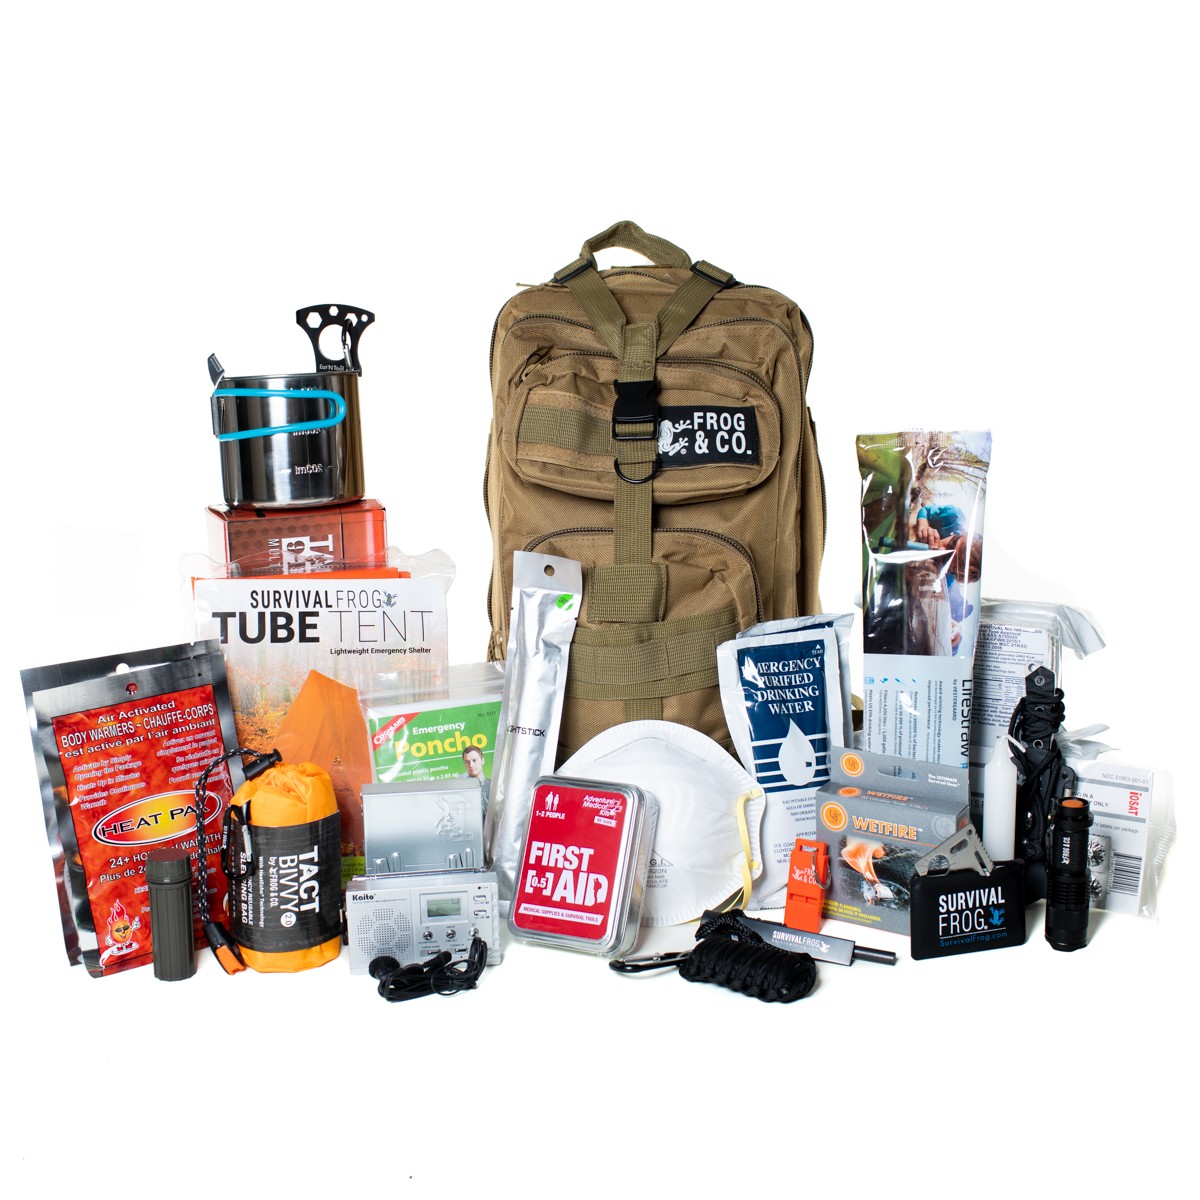 60 in 1 Emergency Survival Gear Kits Outdoor Camping Accessories